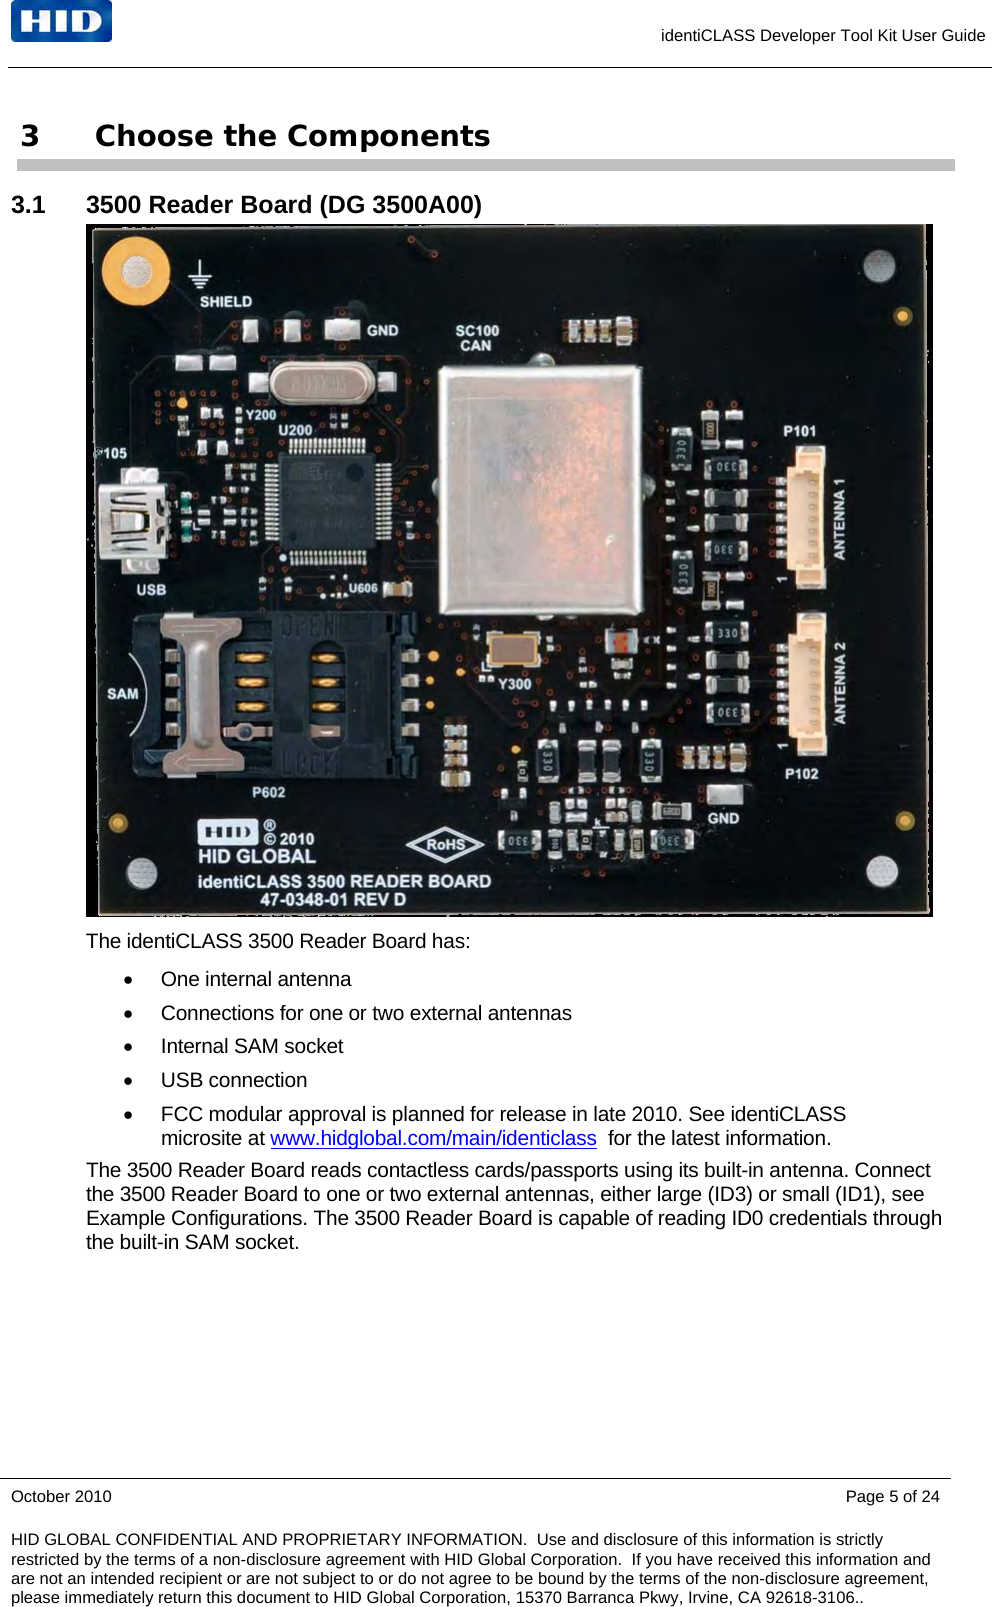     identiCLASS Developer Tool Kit User Guide 3 Choose the Components 3.1  3500 Reader Board (DG 3500A00)  The identiCLASS 3500 Reader Board has:  One internal antenna   Connections for one or two external antennas   Internal SAM socket  USB connection   FCC modular approval is planned for release in late 2010. See identiCLASS microsite at www.hidglobal.com/main/identiclass  for the latest information. The 3500 Reader Board reads contactless cards/passports using its built-in antenna. Connect the 3500 Reader Board to one or two external antennas, either large (ID3) or small (ID1), see Example Configurations. The 3500 Reader Board is capable of reading ID0 credentials through the built-in SAM socket.  October 2010    Page 5 of 24 HID GLOBAL CONFIDENTIAL AND PROPRIETARY INFORMATION.  Use and disclosure of this information is strictly restricted by the terms of a non-disclosure agreement with HID Global Corporation.  If you have received this information and are not an intended recipient or are not subject to or do not agree to be bound by the terms of the non-disclosure agreement, please immediately return this document to HID Global Corporation, 15370 Barranca Pkwy, Irvine, CA 92618-3106..  